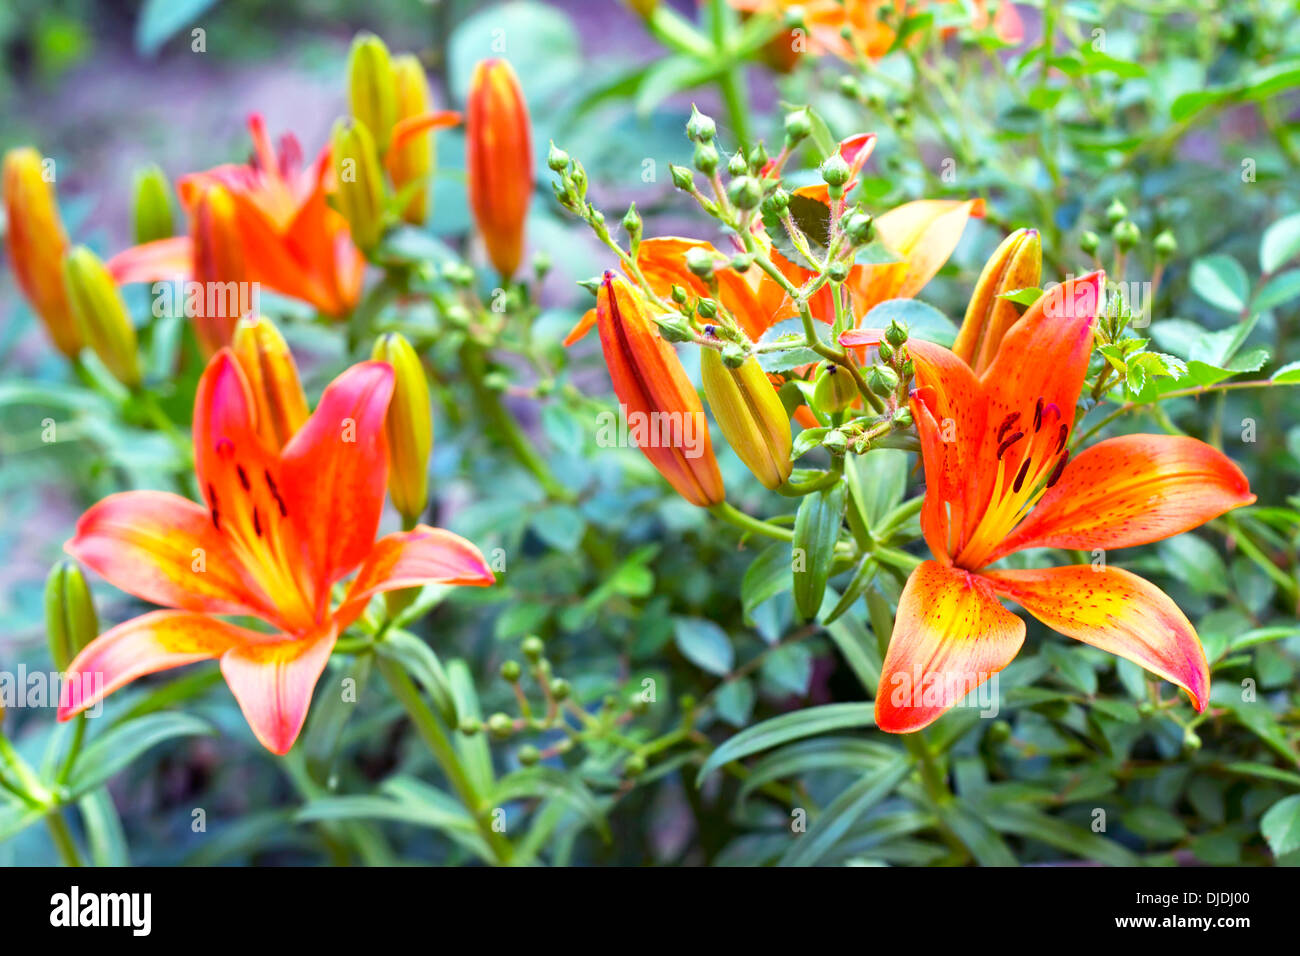 orange lilies blooming on a bed of flowers Stock Photo